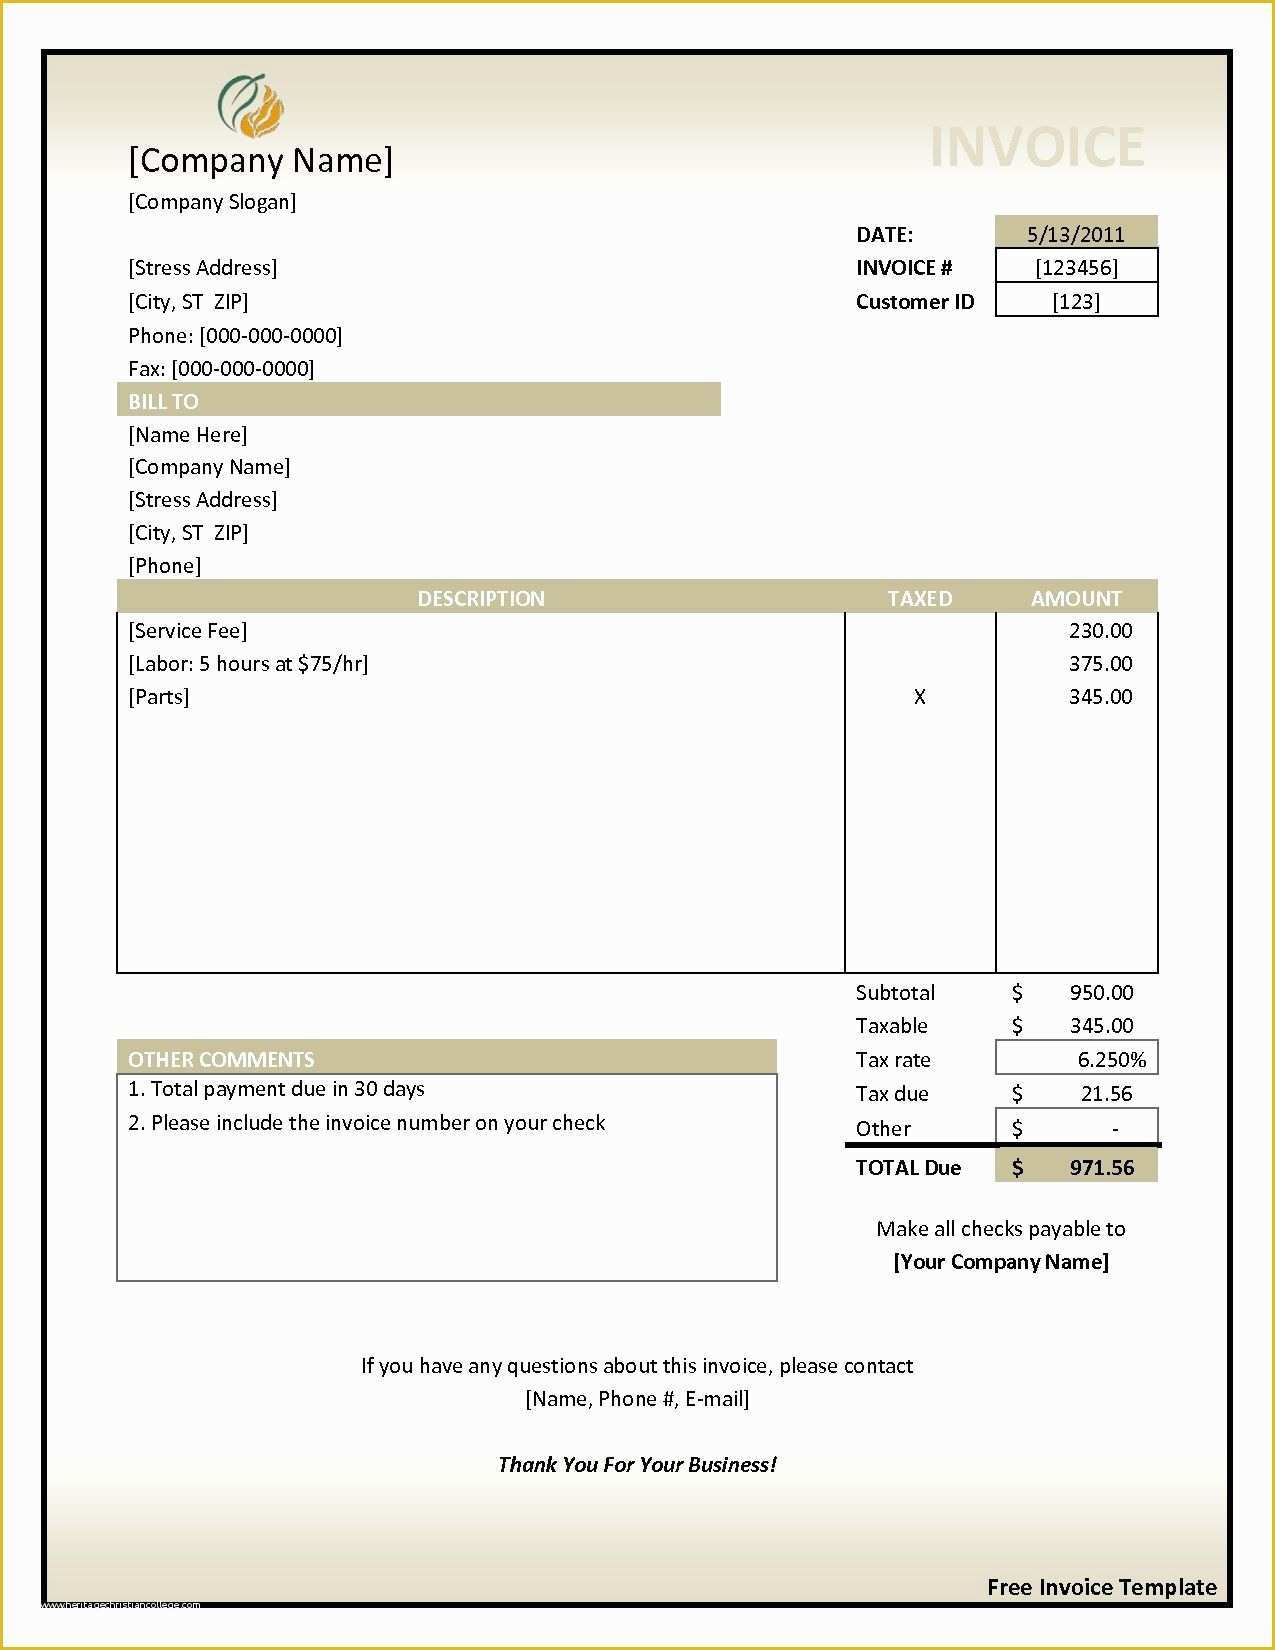 Free Personal Invoice Template Of Sample Invoice Invoice Template Free 2016 Free